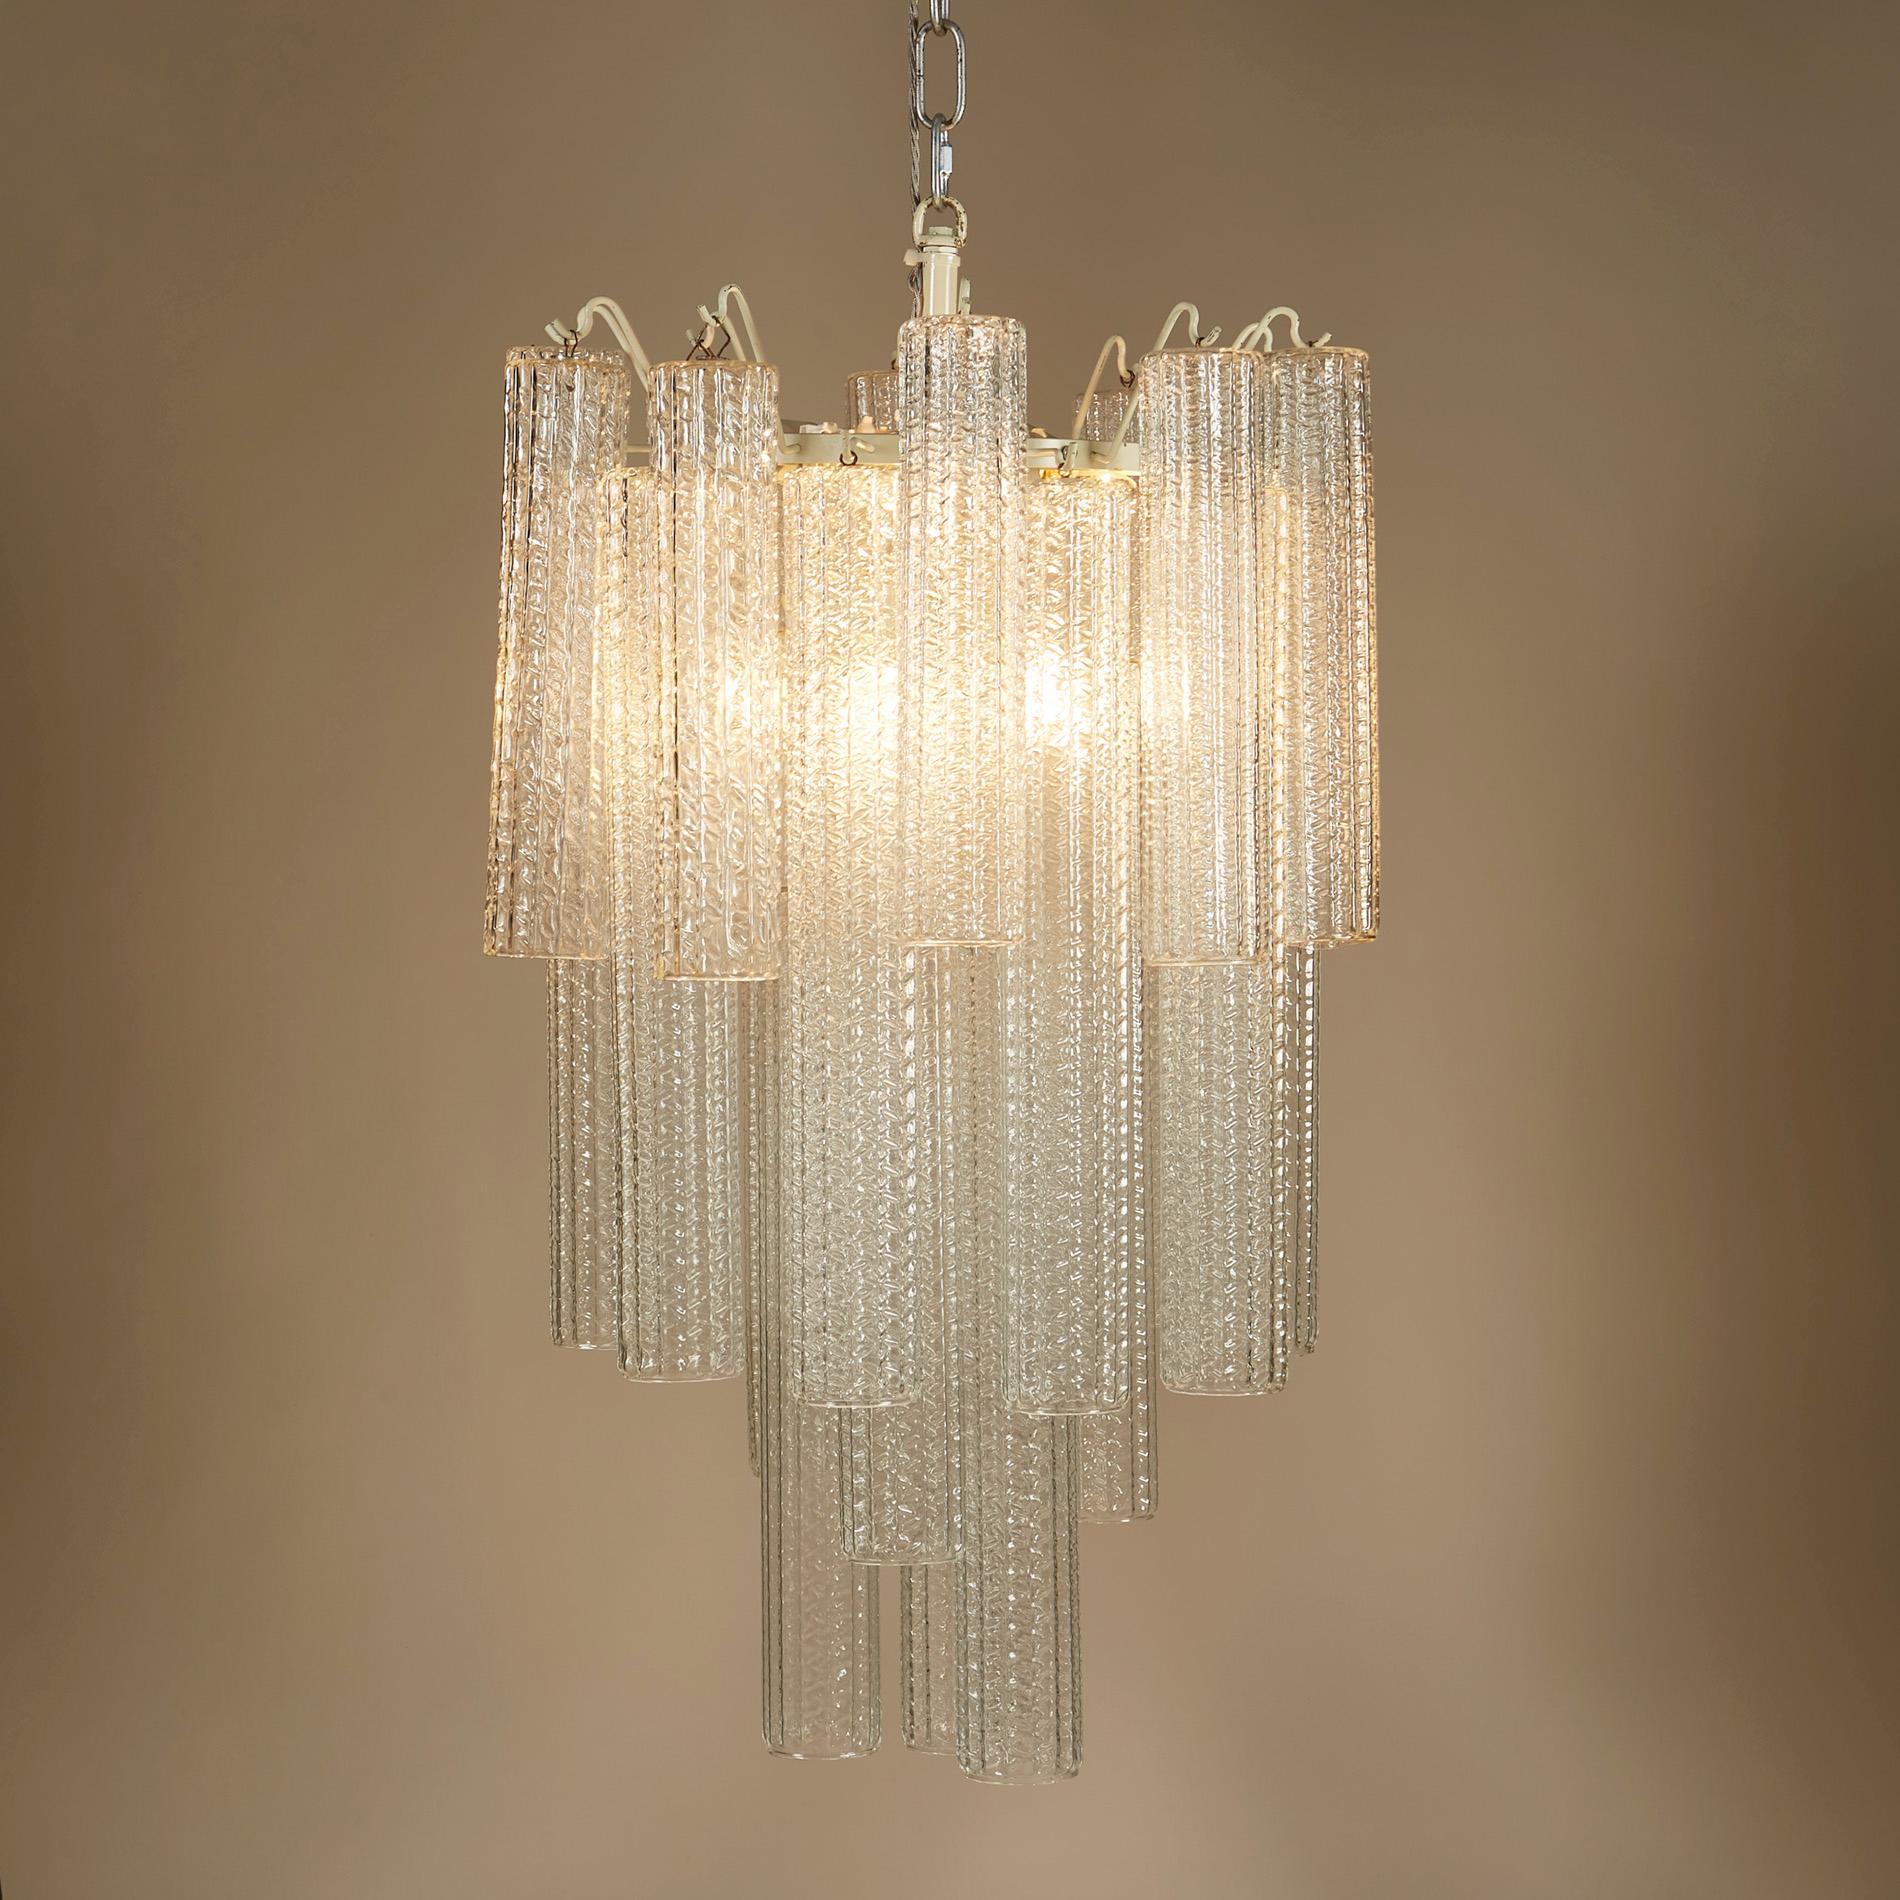 Superb Murano glass chandelier in four tiers of unusually long textured cylindrical drops.

Venini Glass was founded in 1921 on the island of Murano by Paolo Venini. Over the century the manufacturers were responsible for some of the most